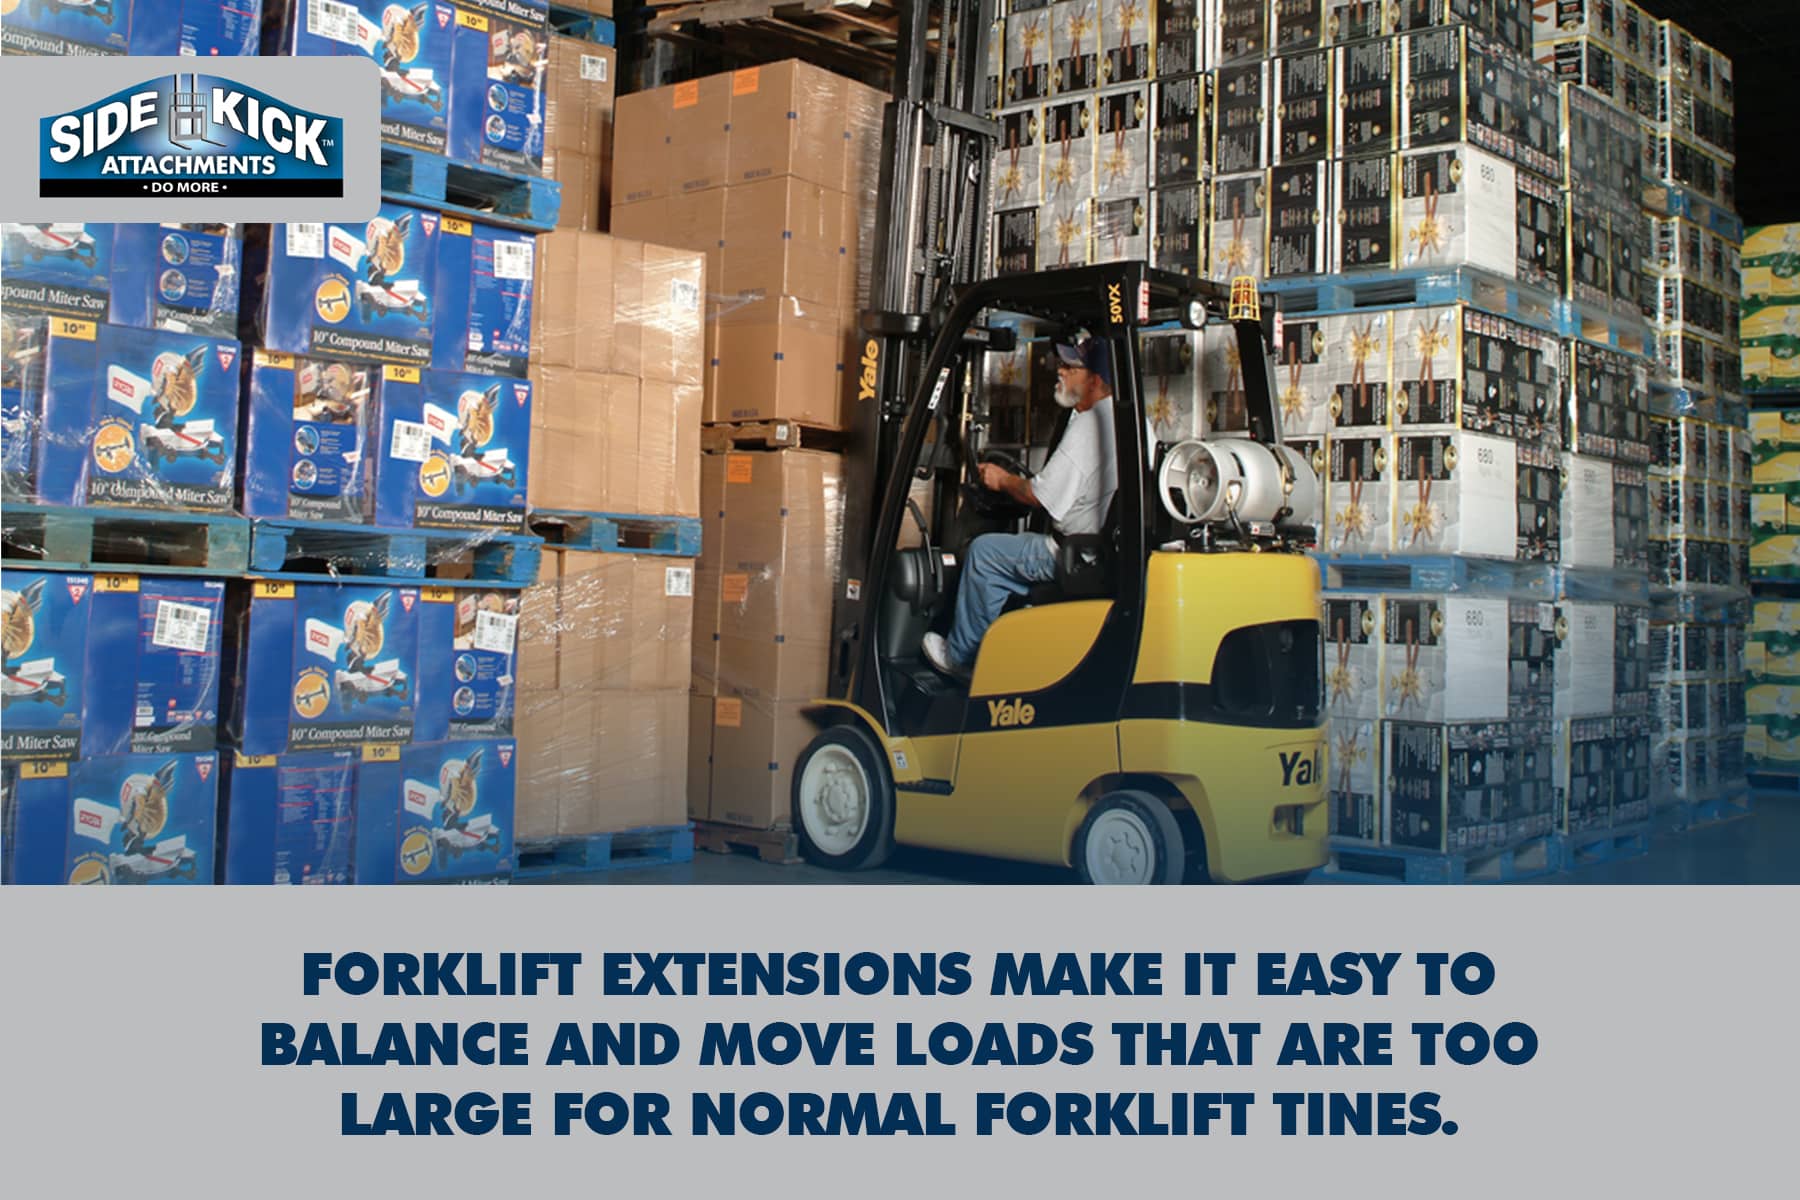 forklift_extensions_make_it_easy_to_balance_and_move